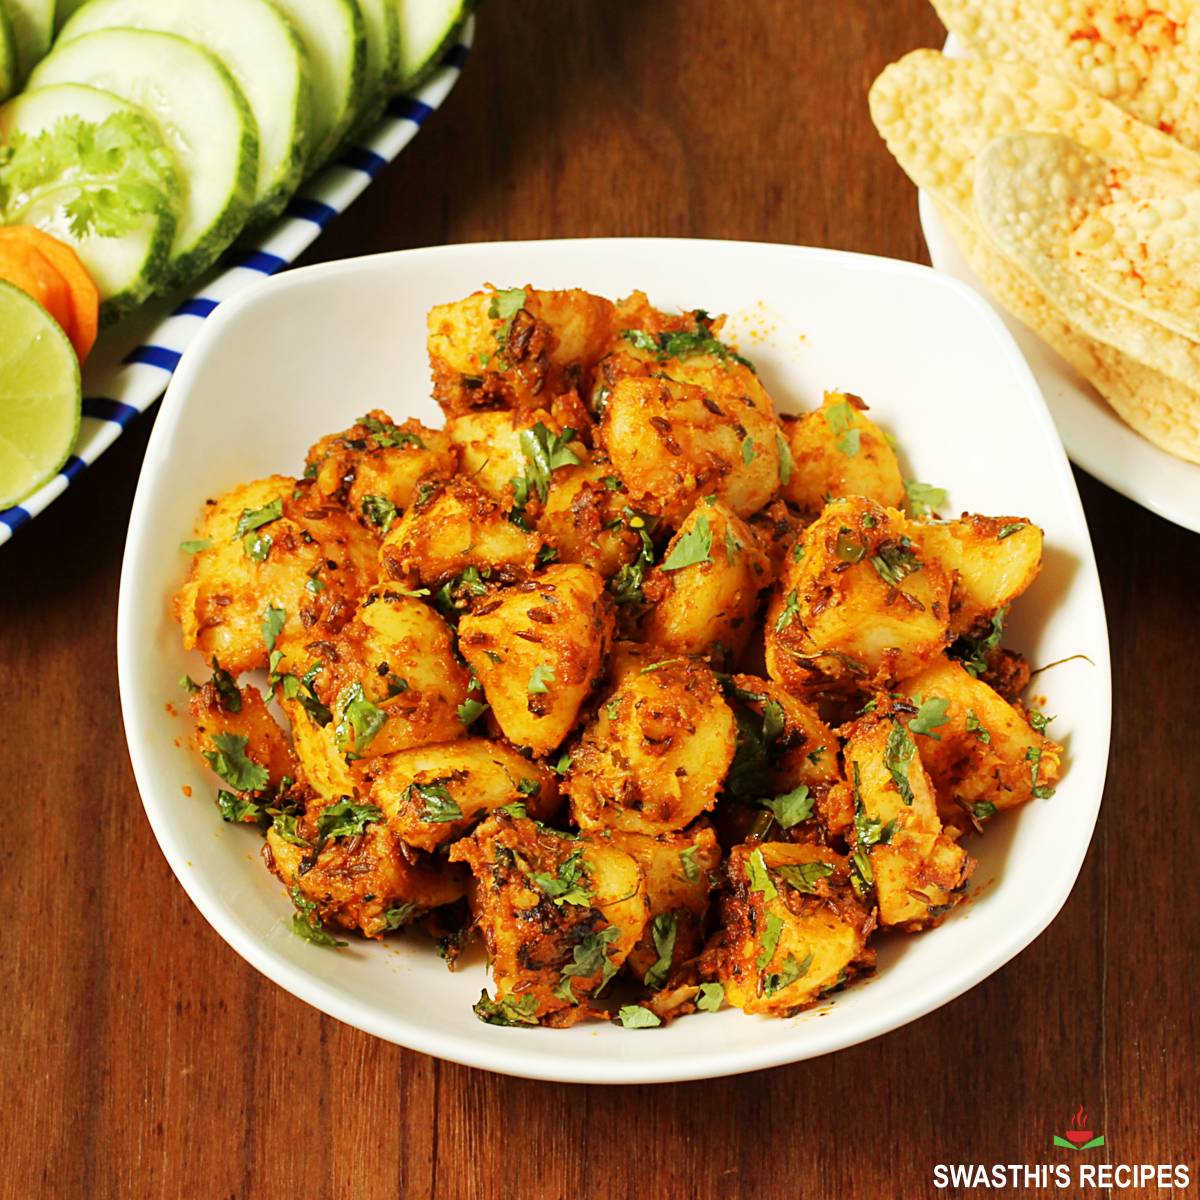 Jeera aloo recipe made with potatoes and spices